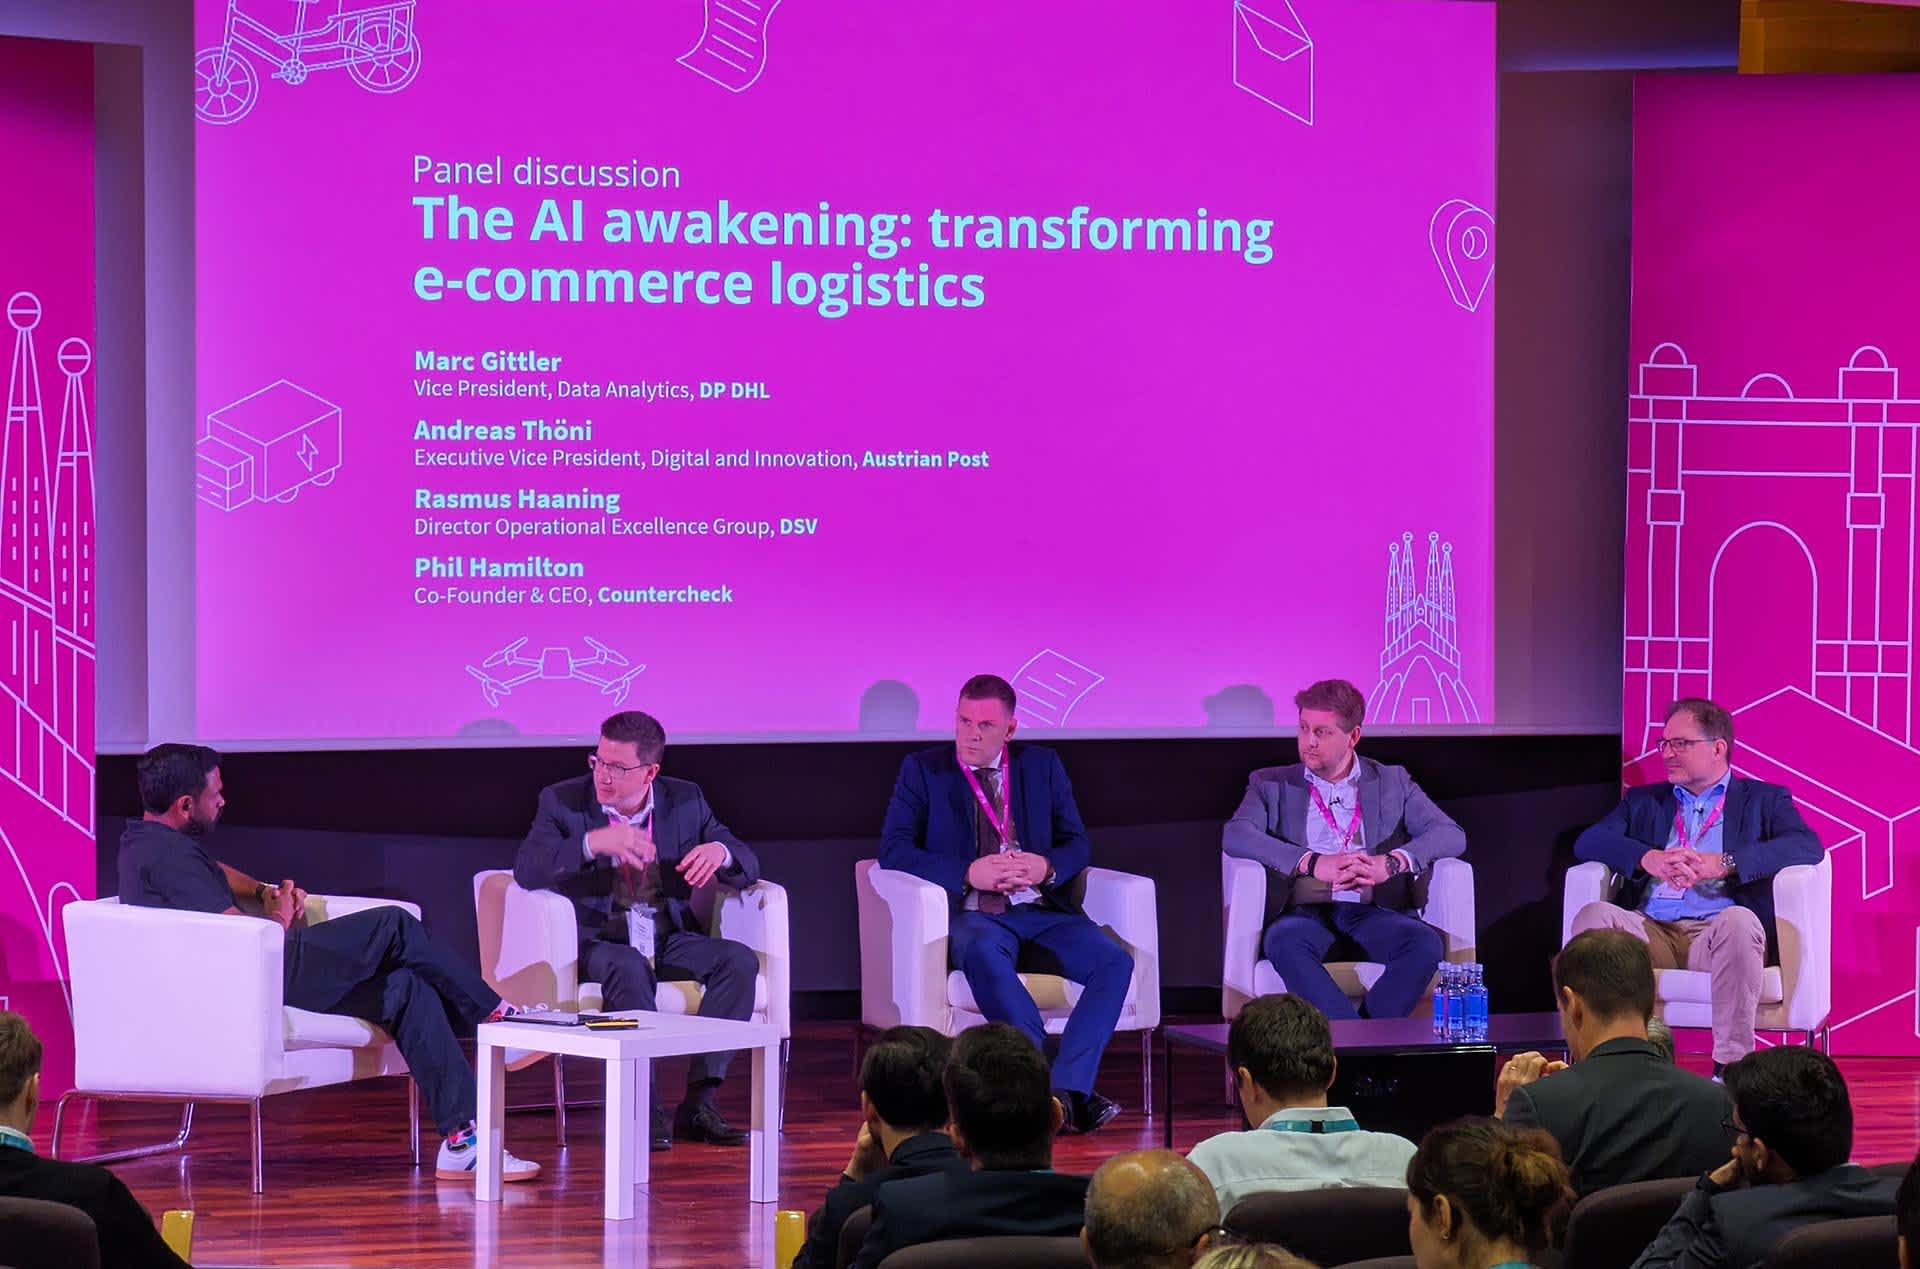 Discussion panel - The AI awakening: transforming eСommerce logistics among chief growth officer from Countercheck and others